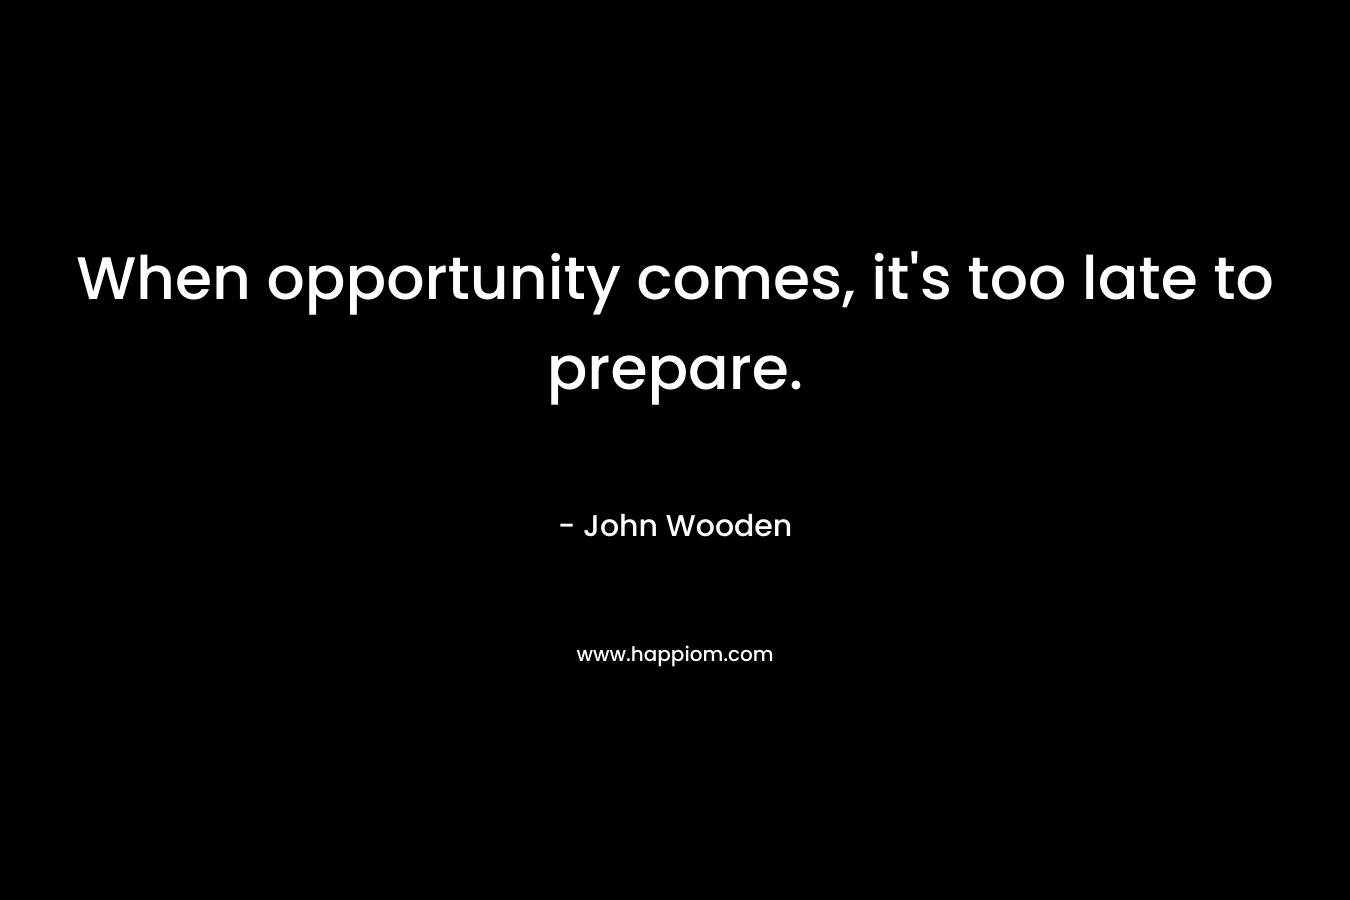 When opportunity comes, it’s too late to prepare. – John Wooden